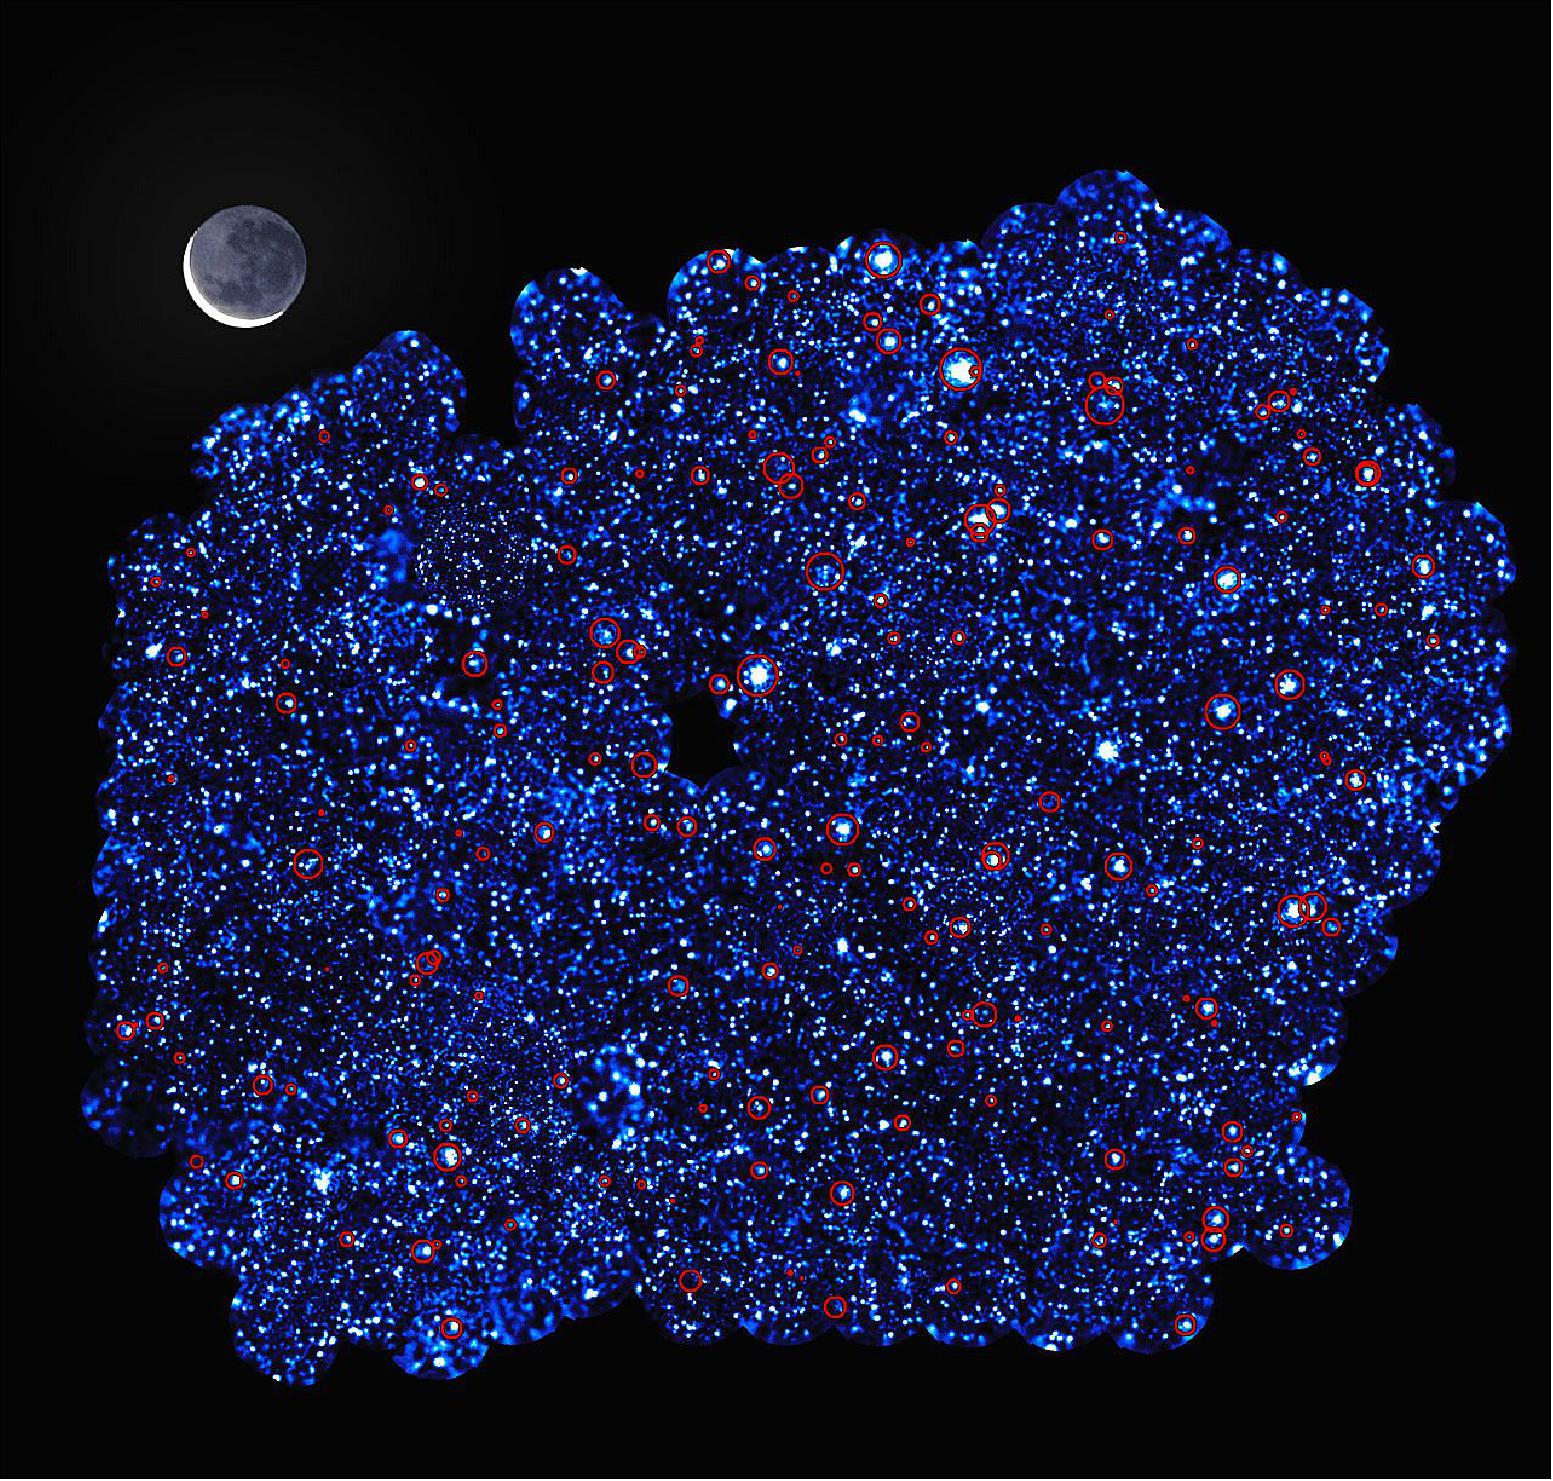 Figure 56: X-ray image of the XXL-South Field, one of the two fields observed by the XXL survey. The XXL survey has combined archival data as well as new observations of galaxy clusters covering the wavelength range from 1 x 10-4 µm (X-ray, observed with XMM) to more than 1 meter, observed with the GMRT (Giant Meterwave Radio Telescope), image credit: ESA/XMM-Newton/XXL survey consortium, (S. Snowden, L. Faccioli, F. Pacaud)